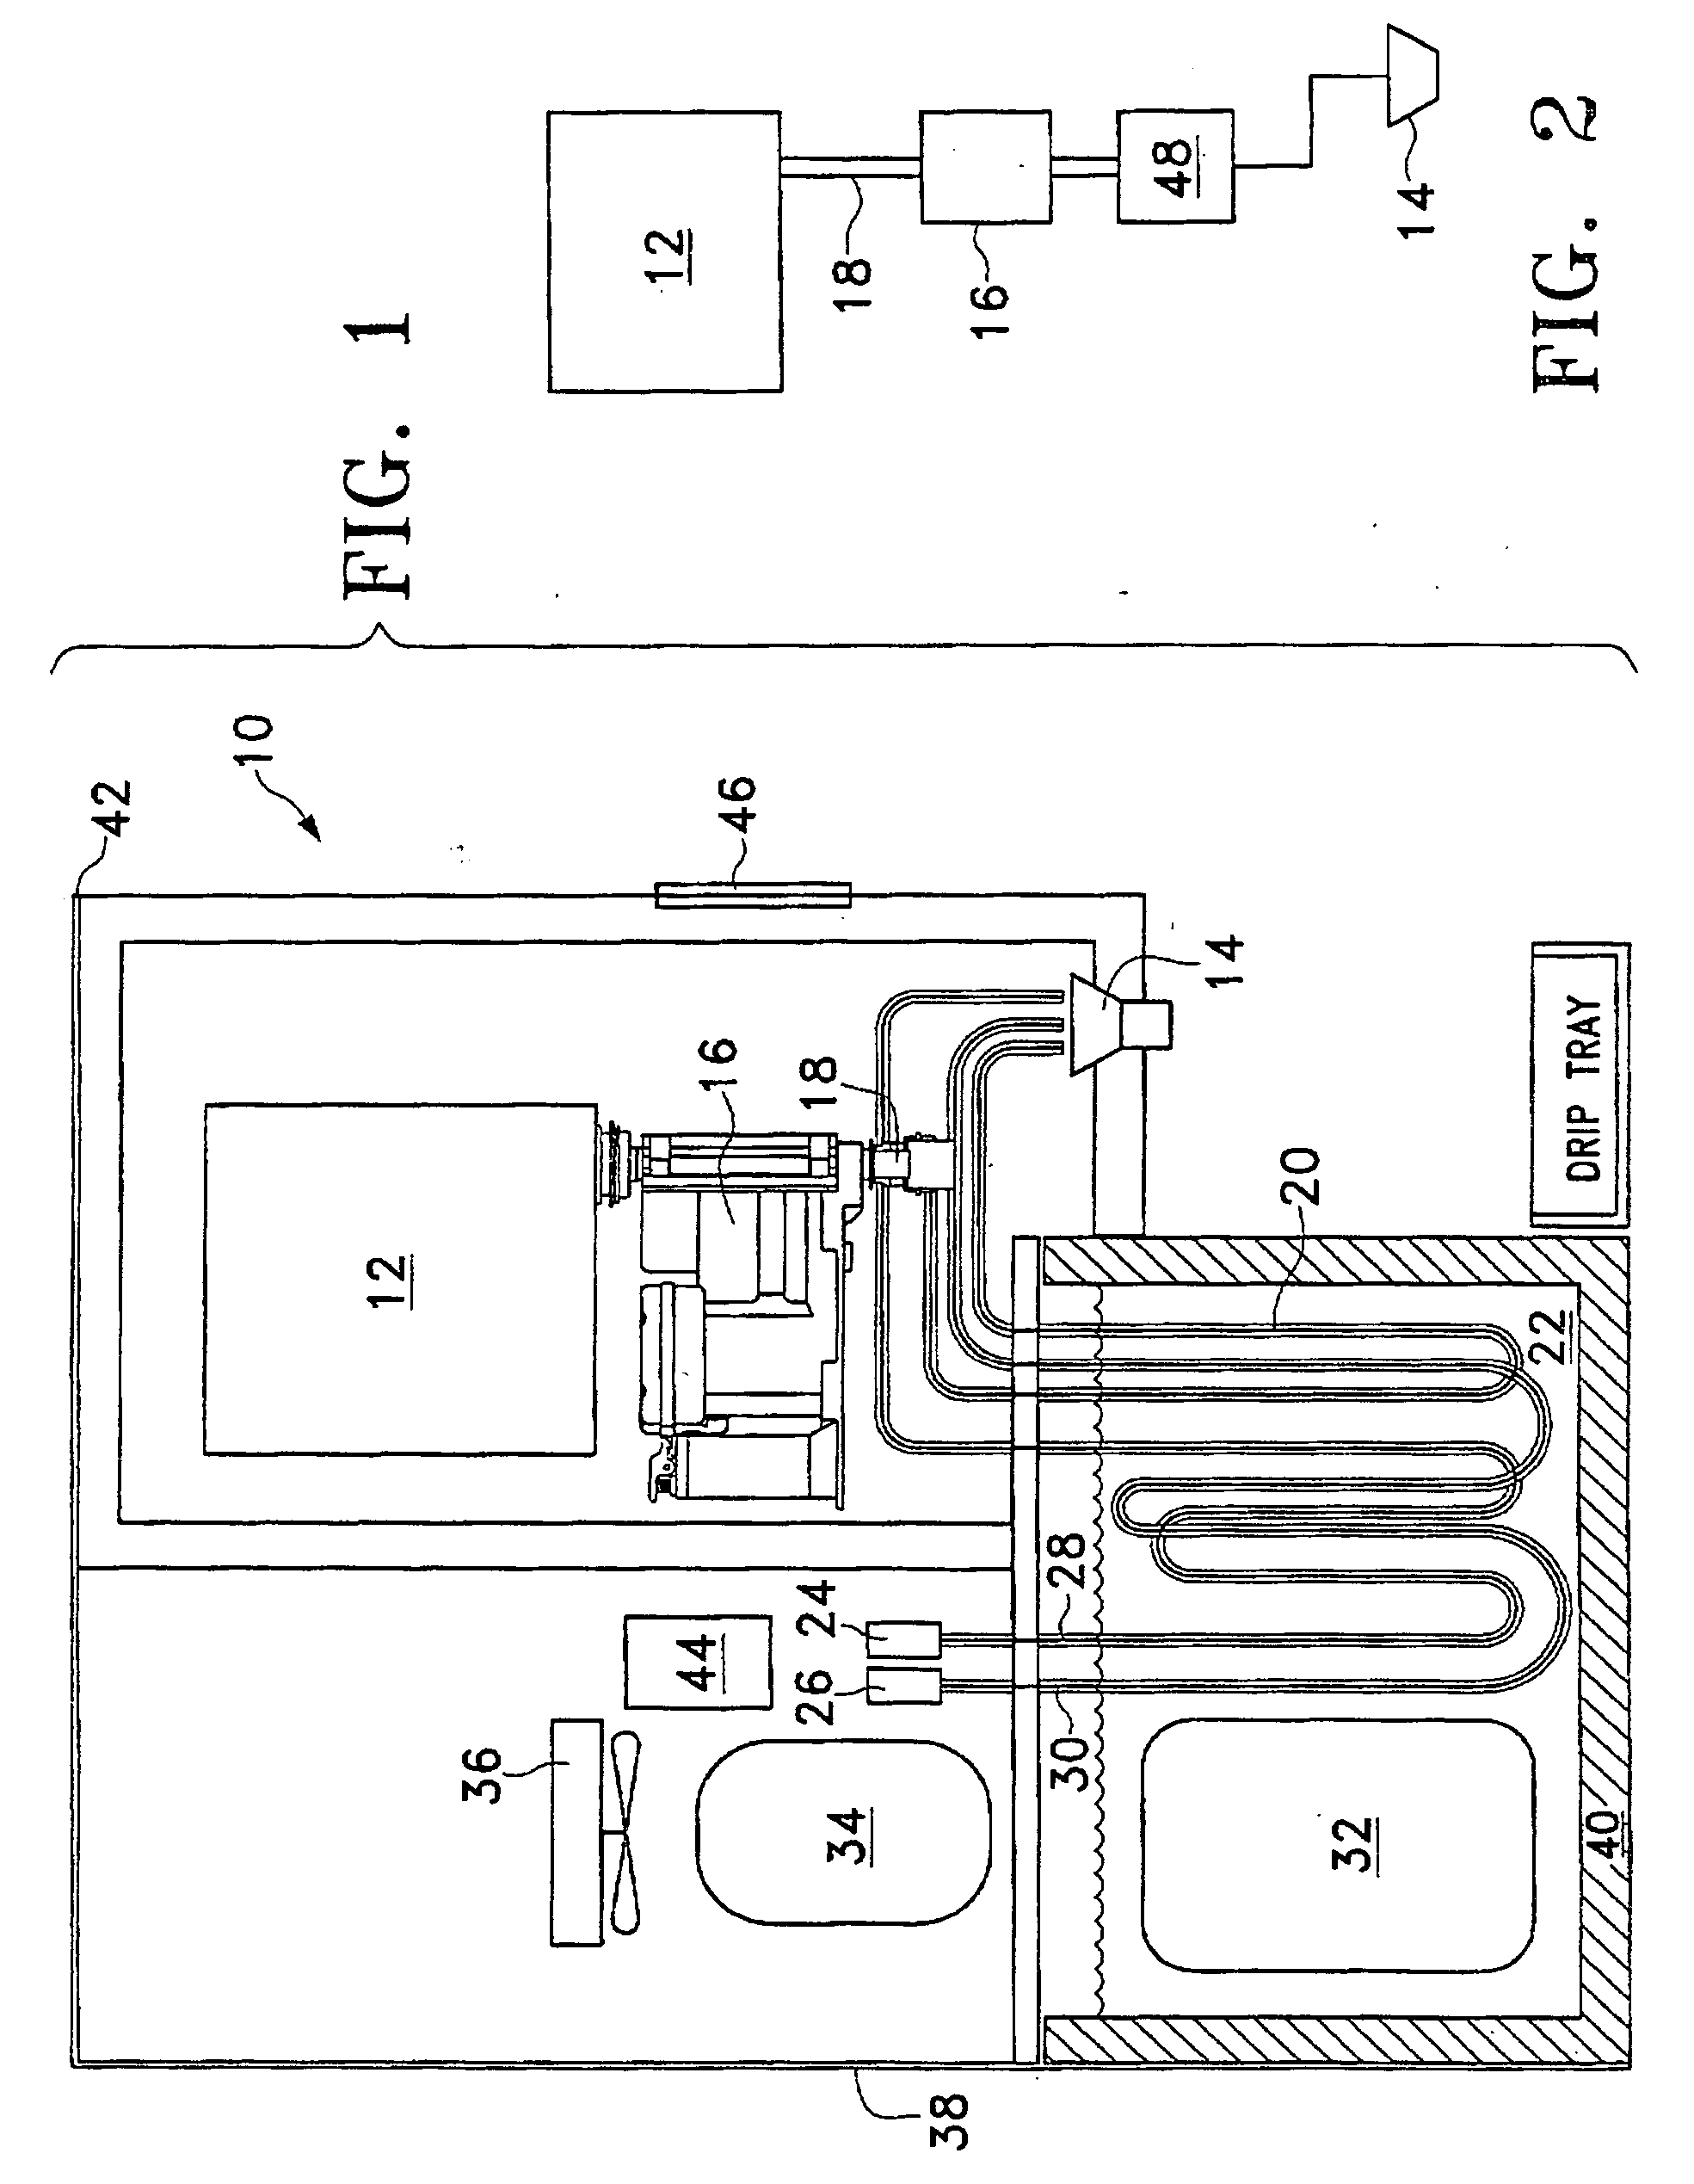 Methods and apparatus for pumping and dispensing